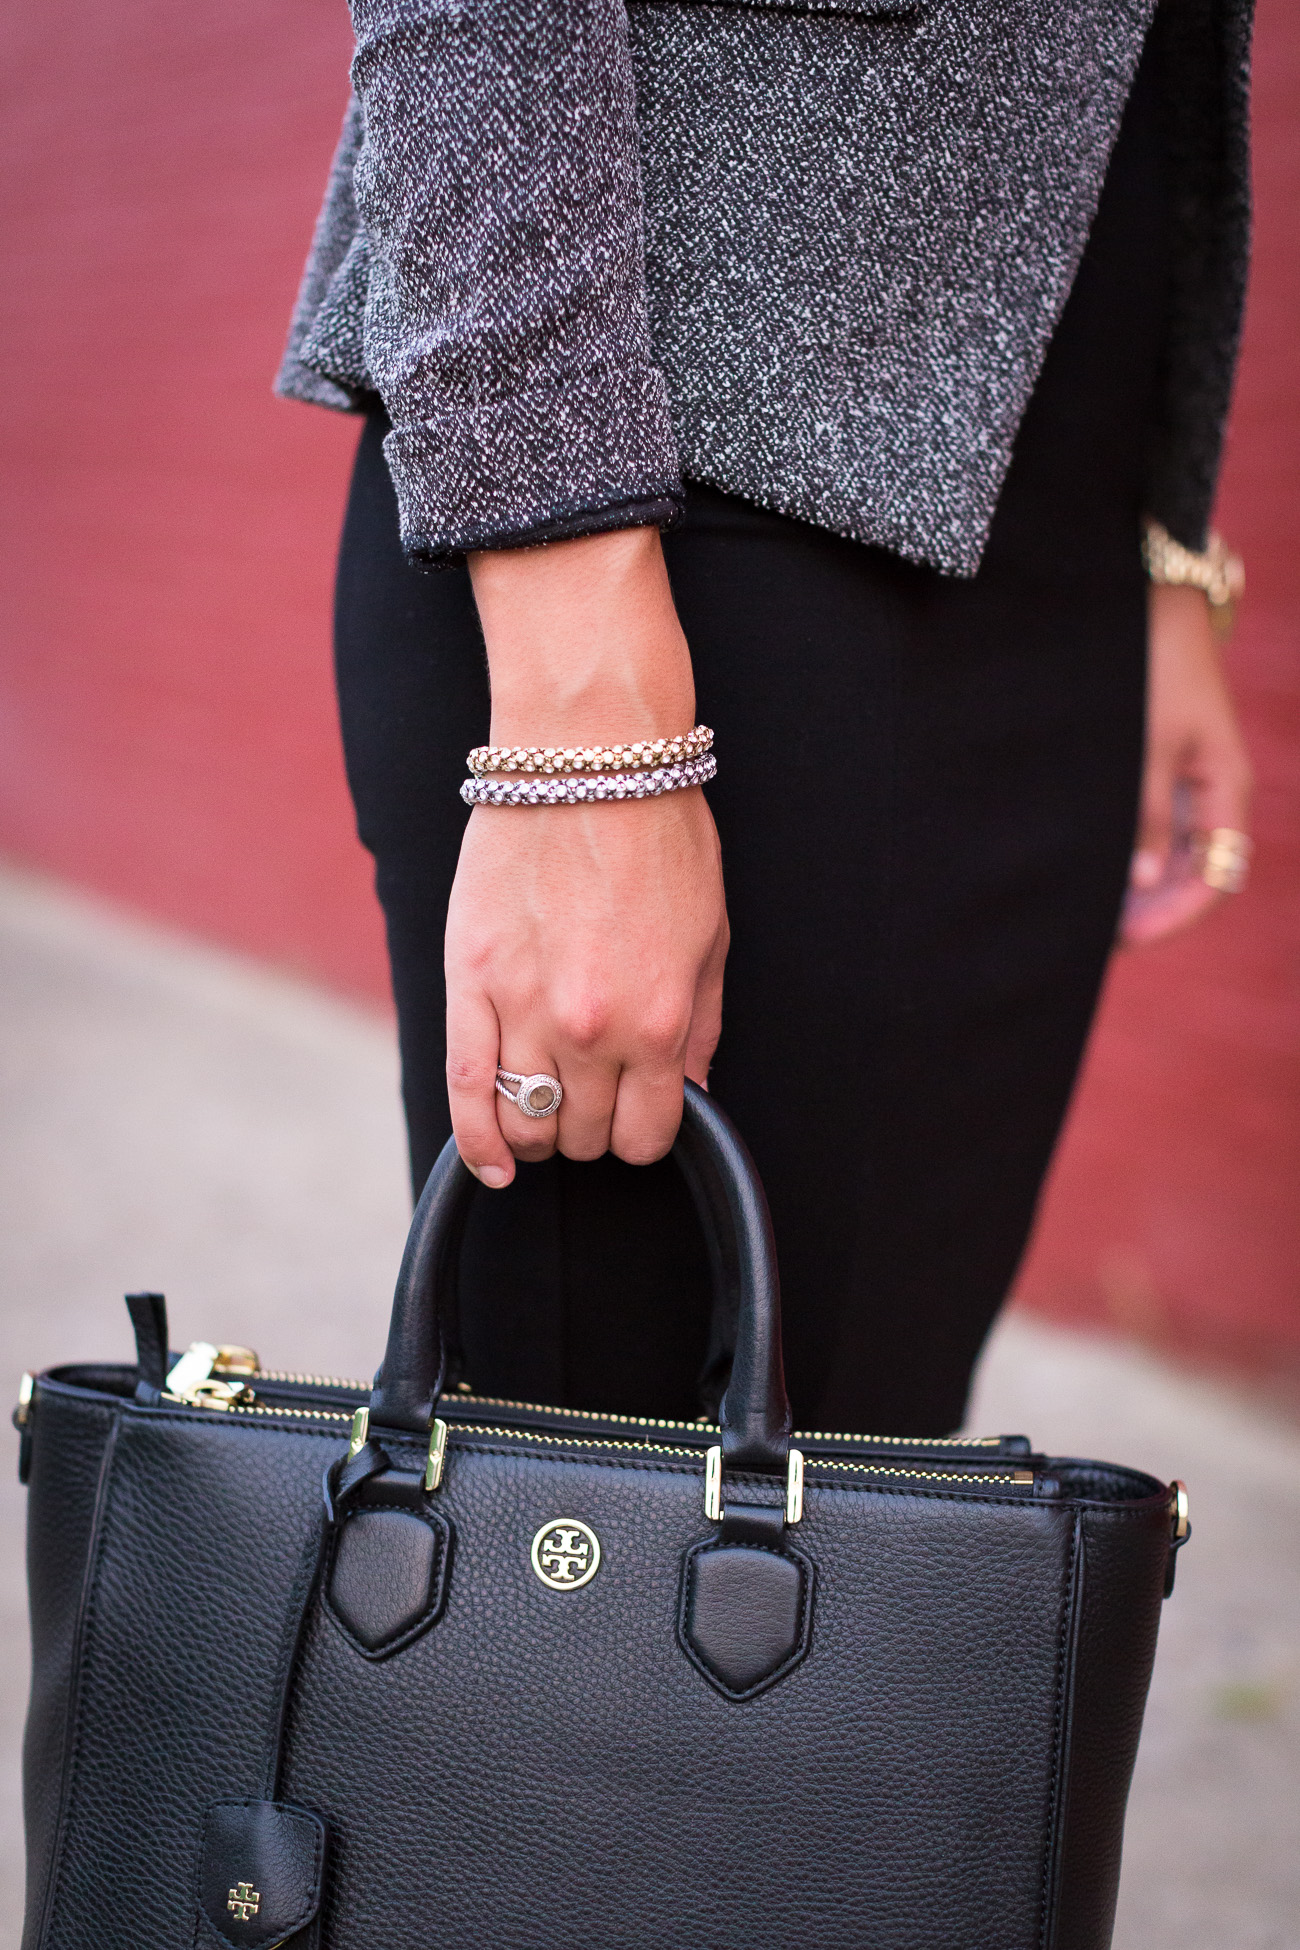 michael kors watch, michael kors holiday collection, black pencil dress, business chic, tory burch tote, tweed blazer, fall fashion // grace wainwright from a southern drawl